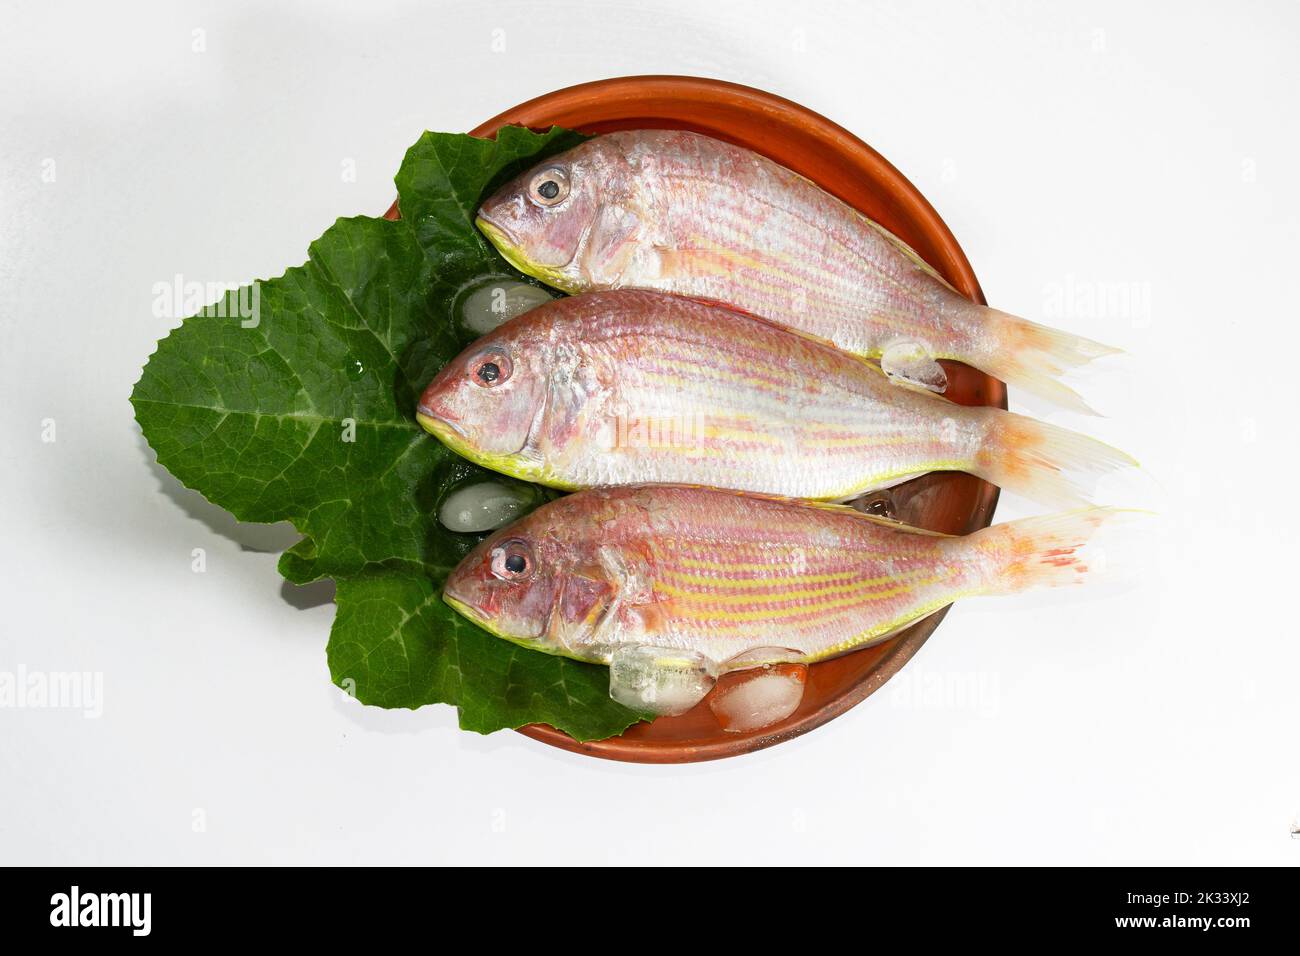 Red croaker, Lal poa, Pama, seafood Stock Photo